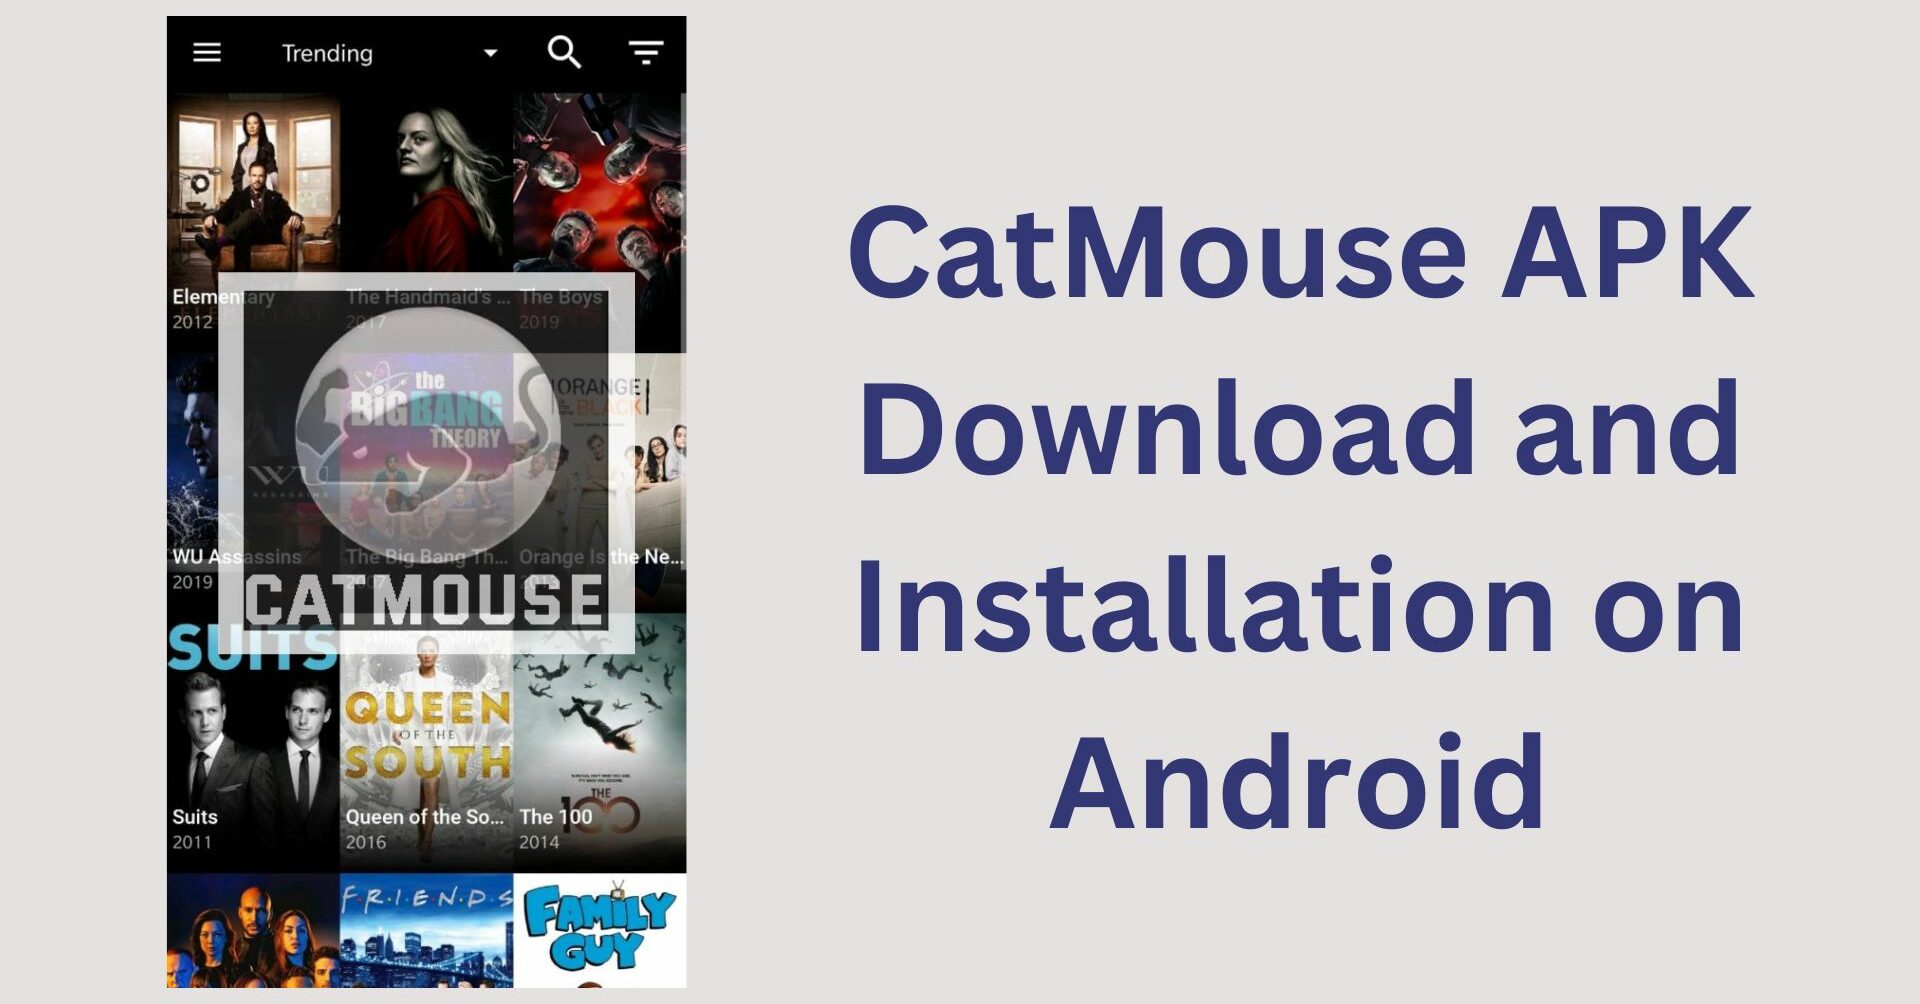 CatMouse APK Download and Installation on Android